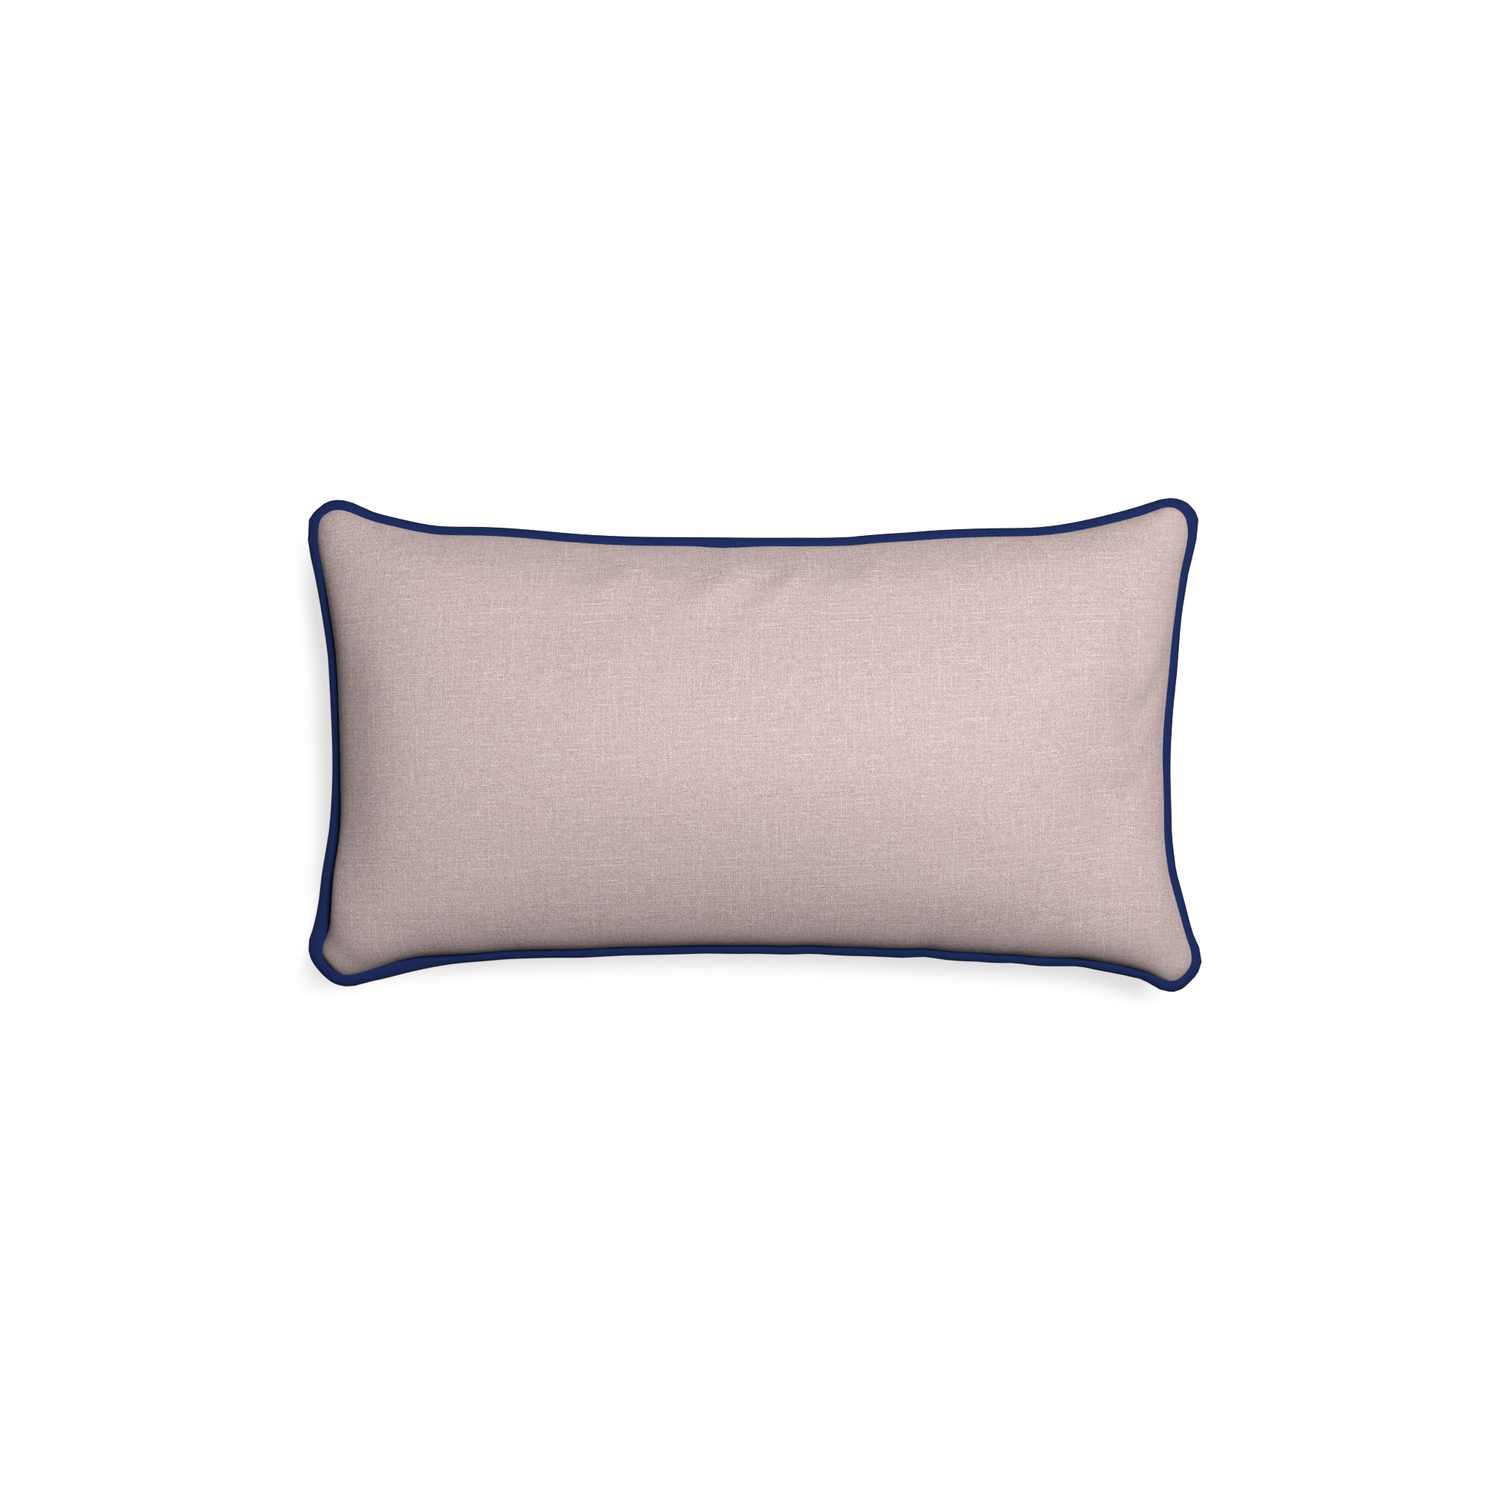 Petite-lumbar orchid custom mauve pinkpillow with midnight piping on white background